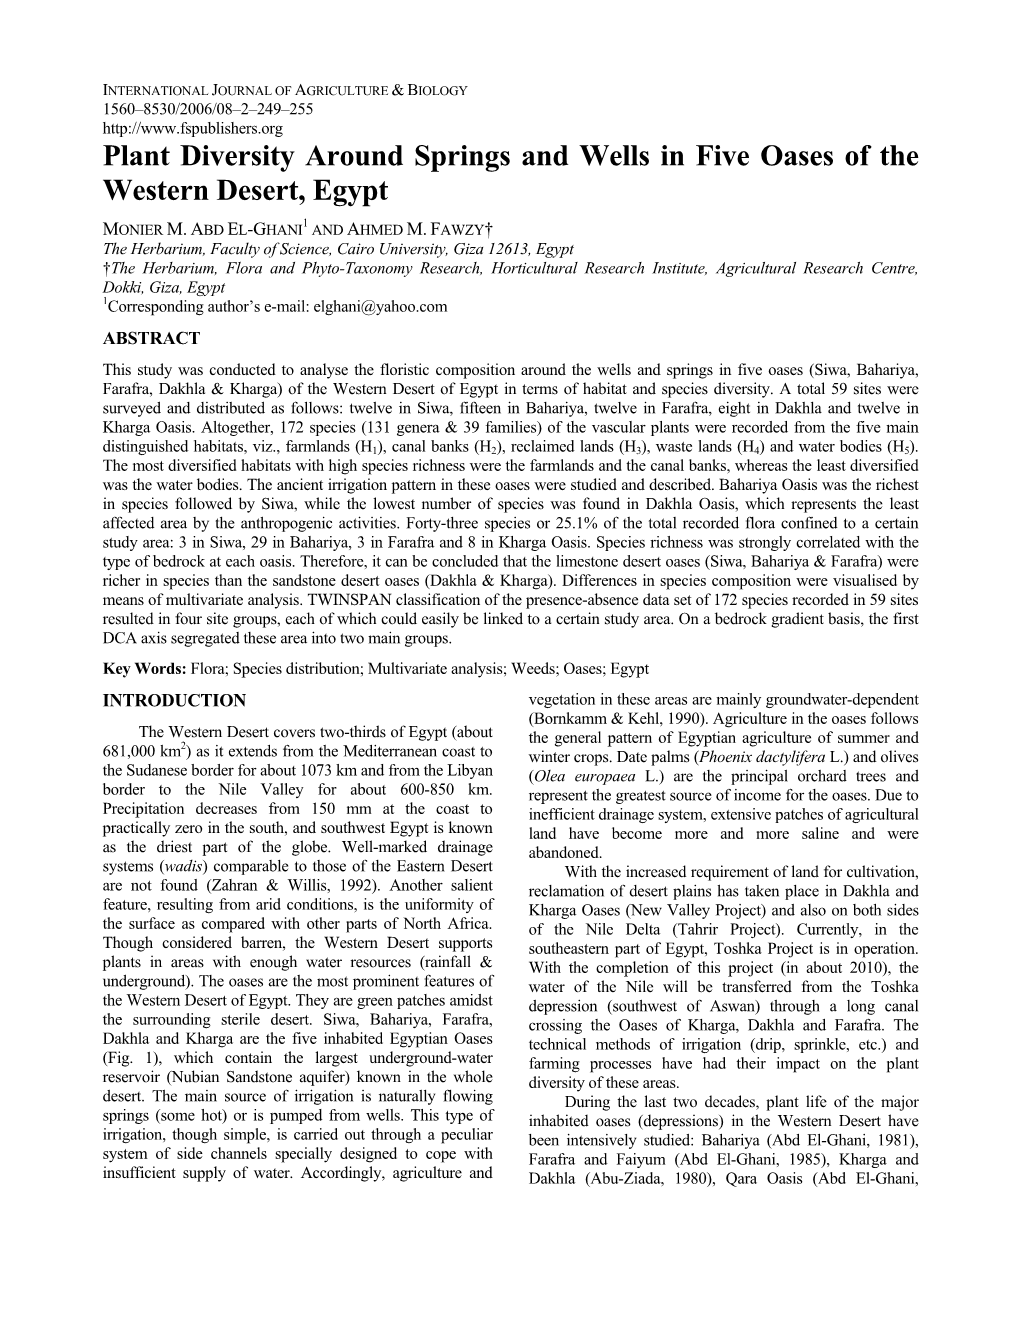 Plant Diversity Around Springs and Wells in Five Oases of the Western Desert, Egypt